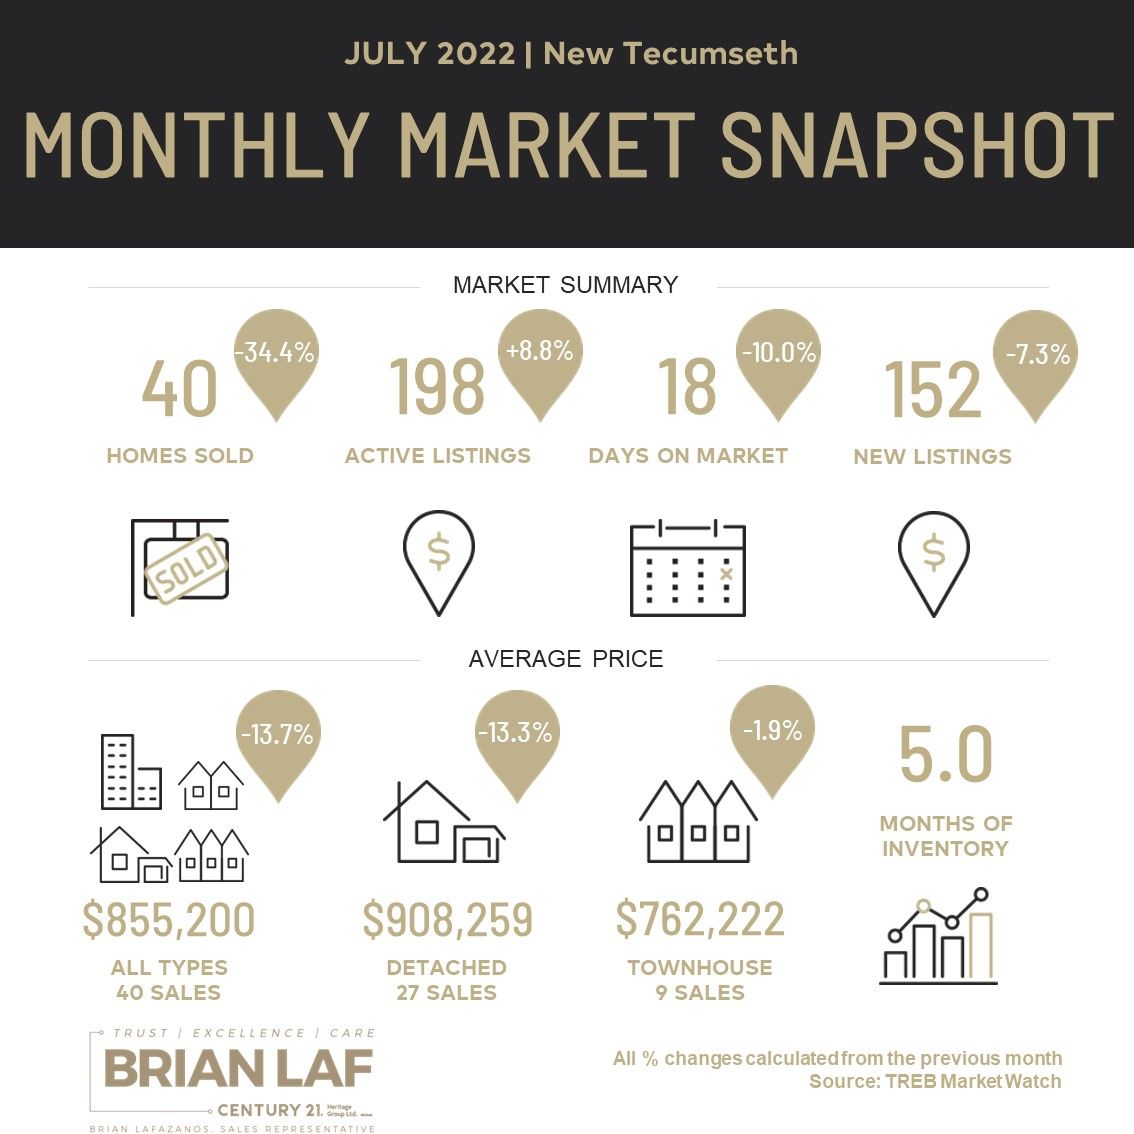 New Tecumseth Monthly Market Update - July, 2022